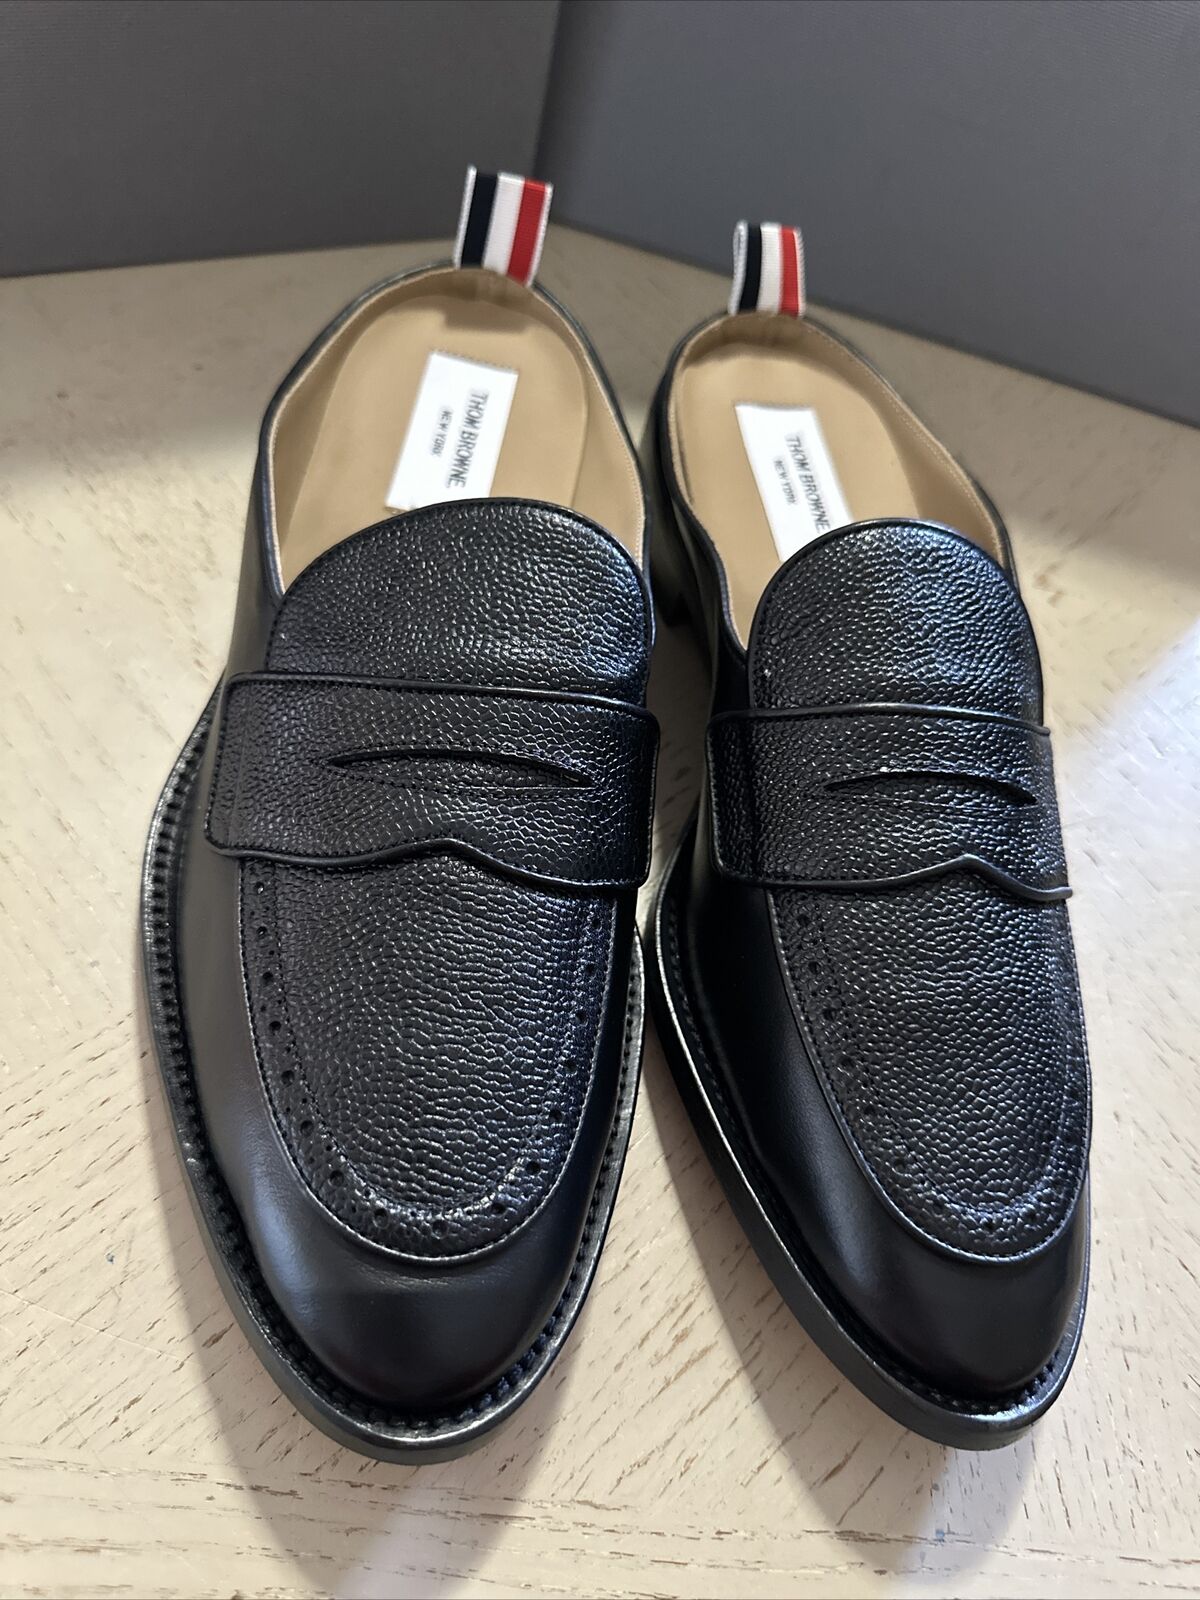 Thom Browne Men Leather Penny Loafers Sandal Shoes Black 12 US / 45 EU Italy New